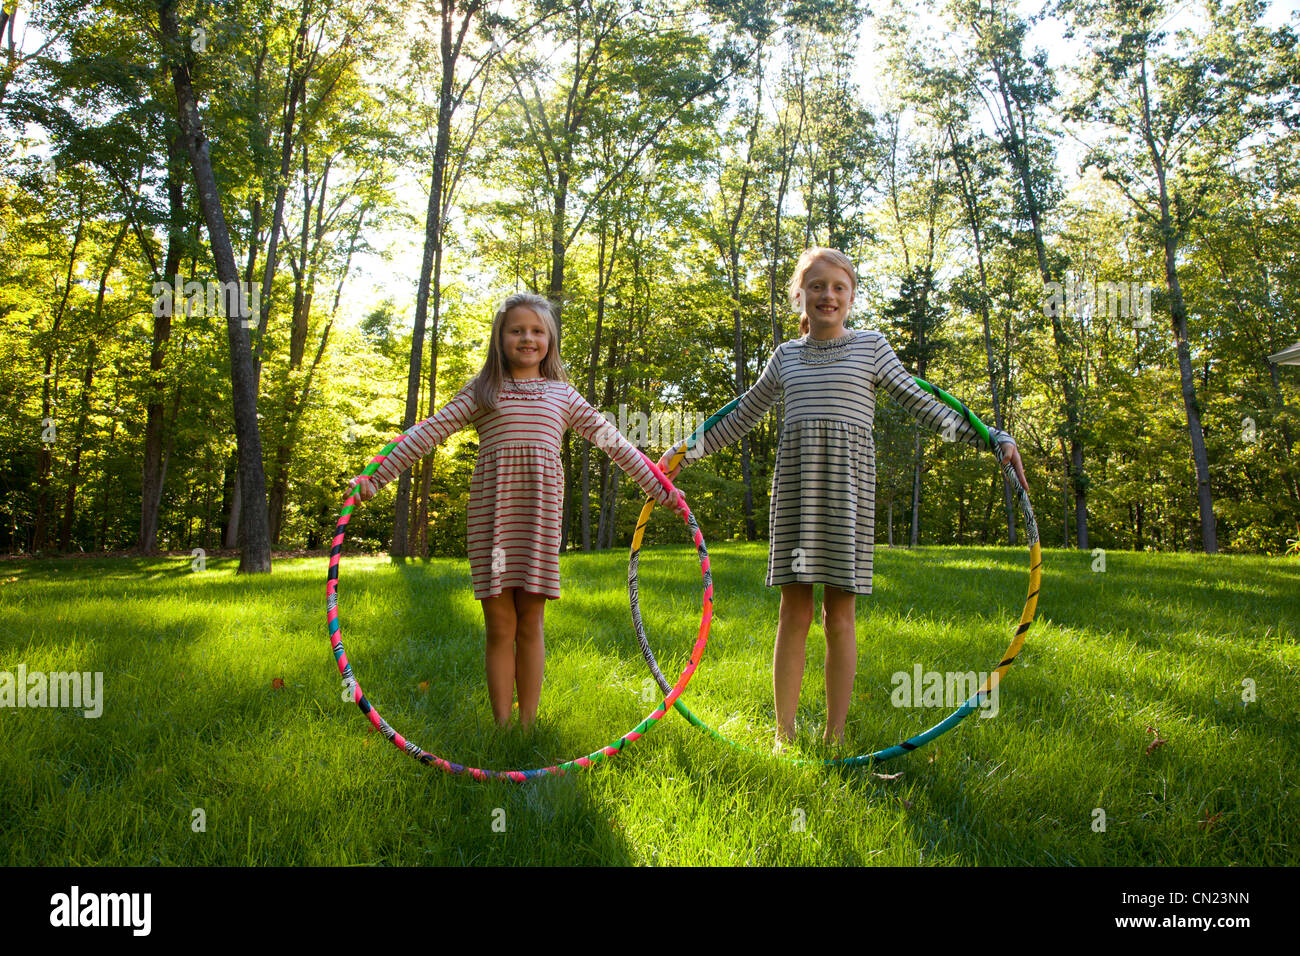 Two Girls With Hula Hoops Stock Photo